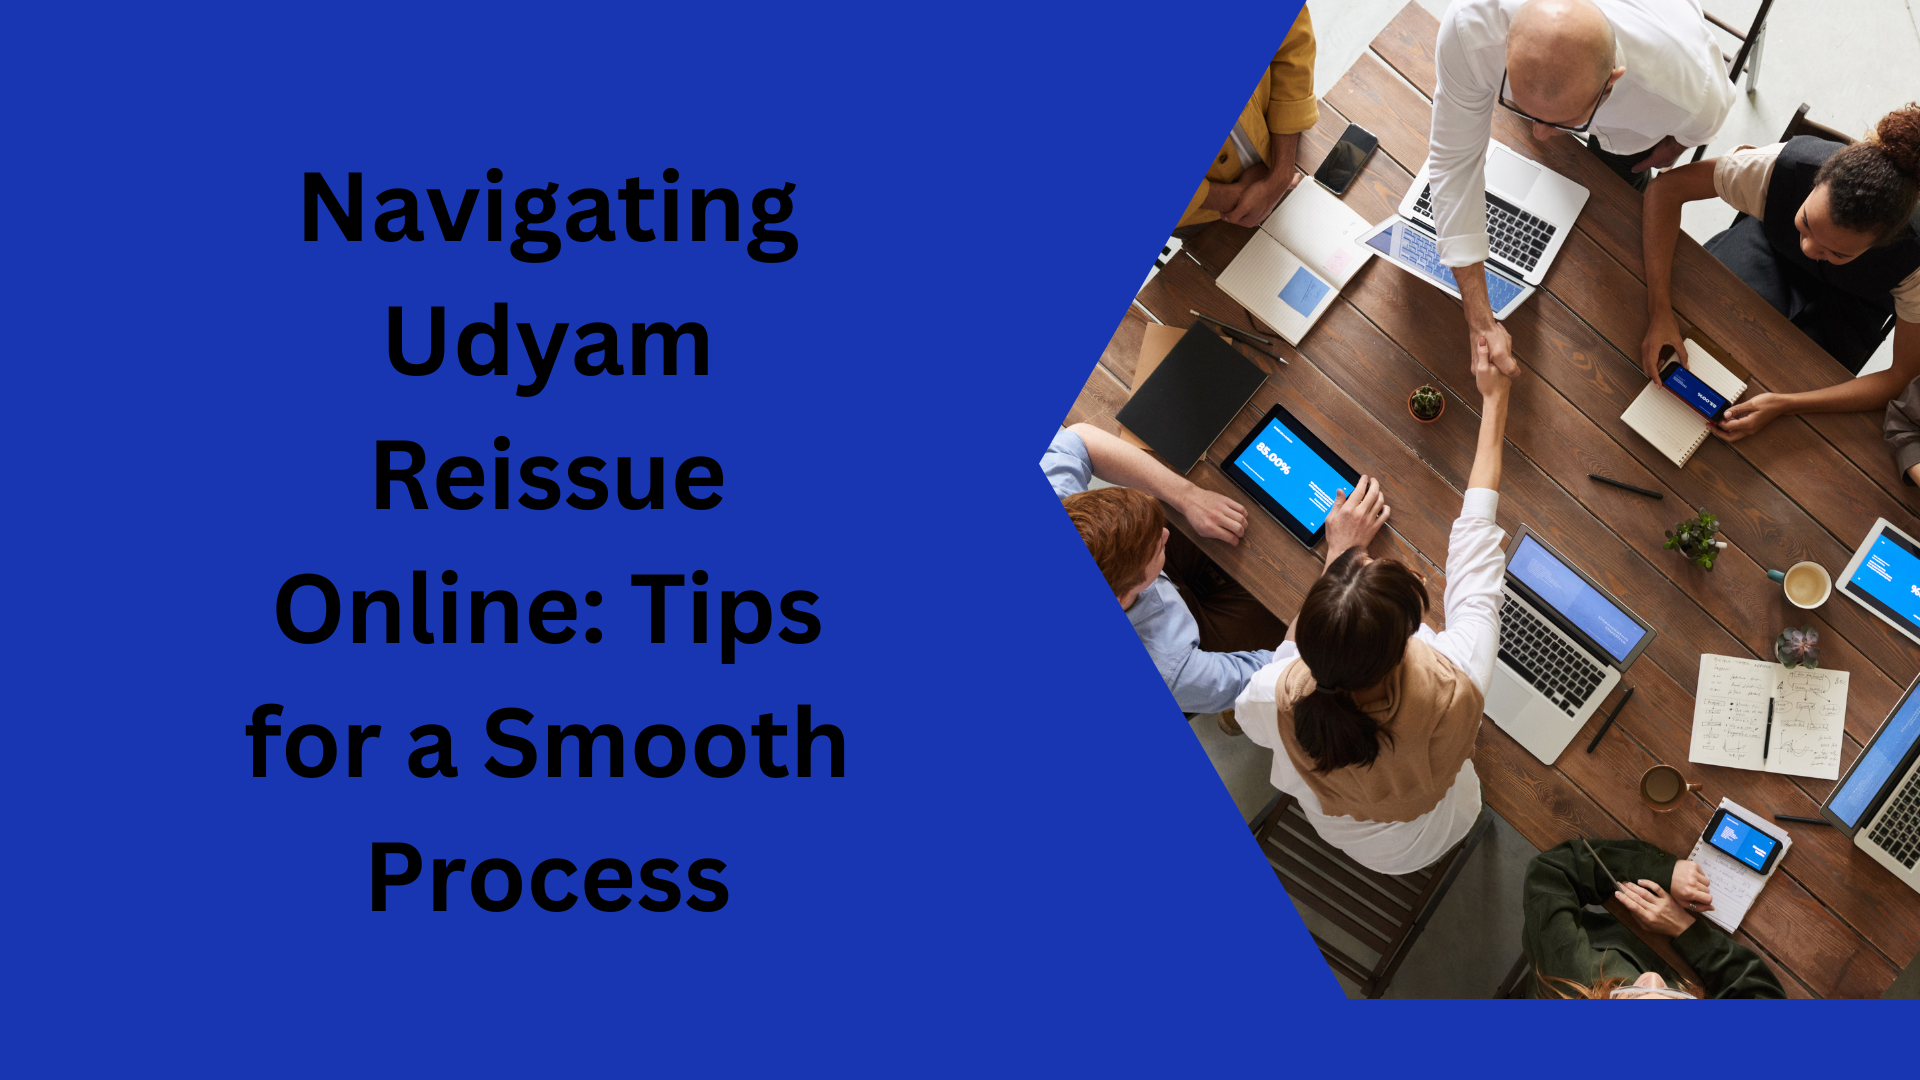 Navigating Udyam Reissue Online Tips for a Smooth Process